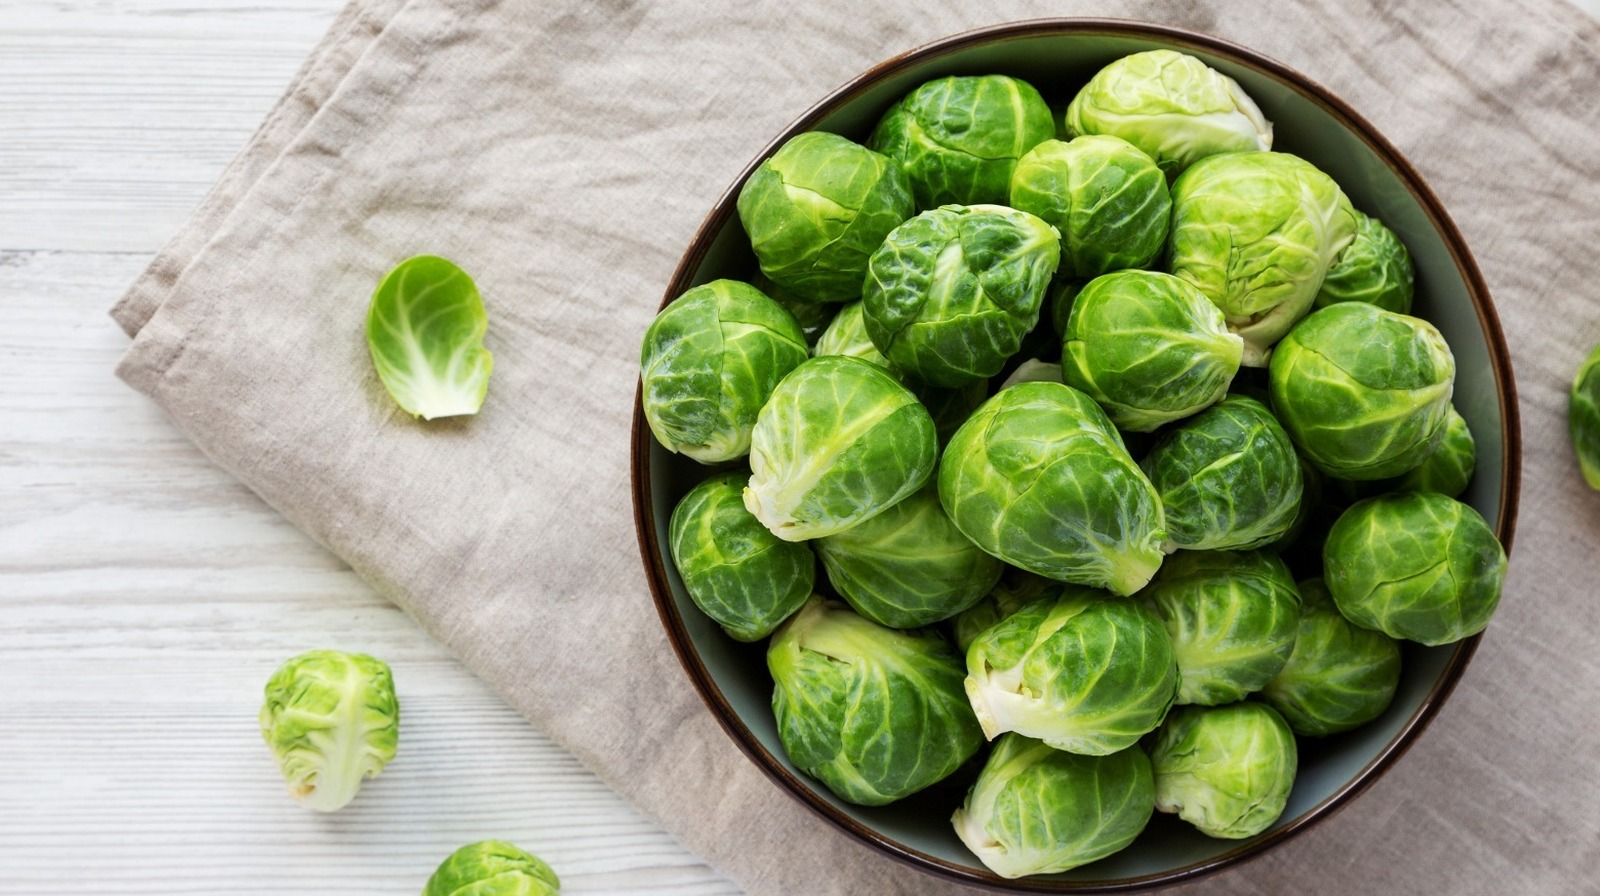 A Hack For Shredding Brussels Sprouts When Knives Are Inconvenient – Mashed